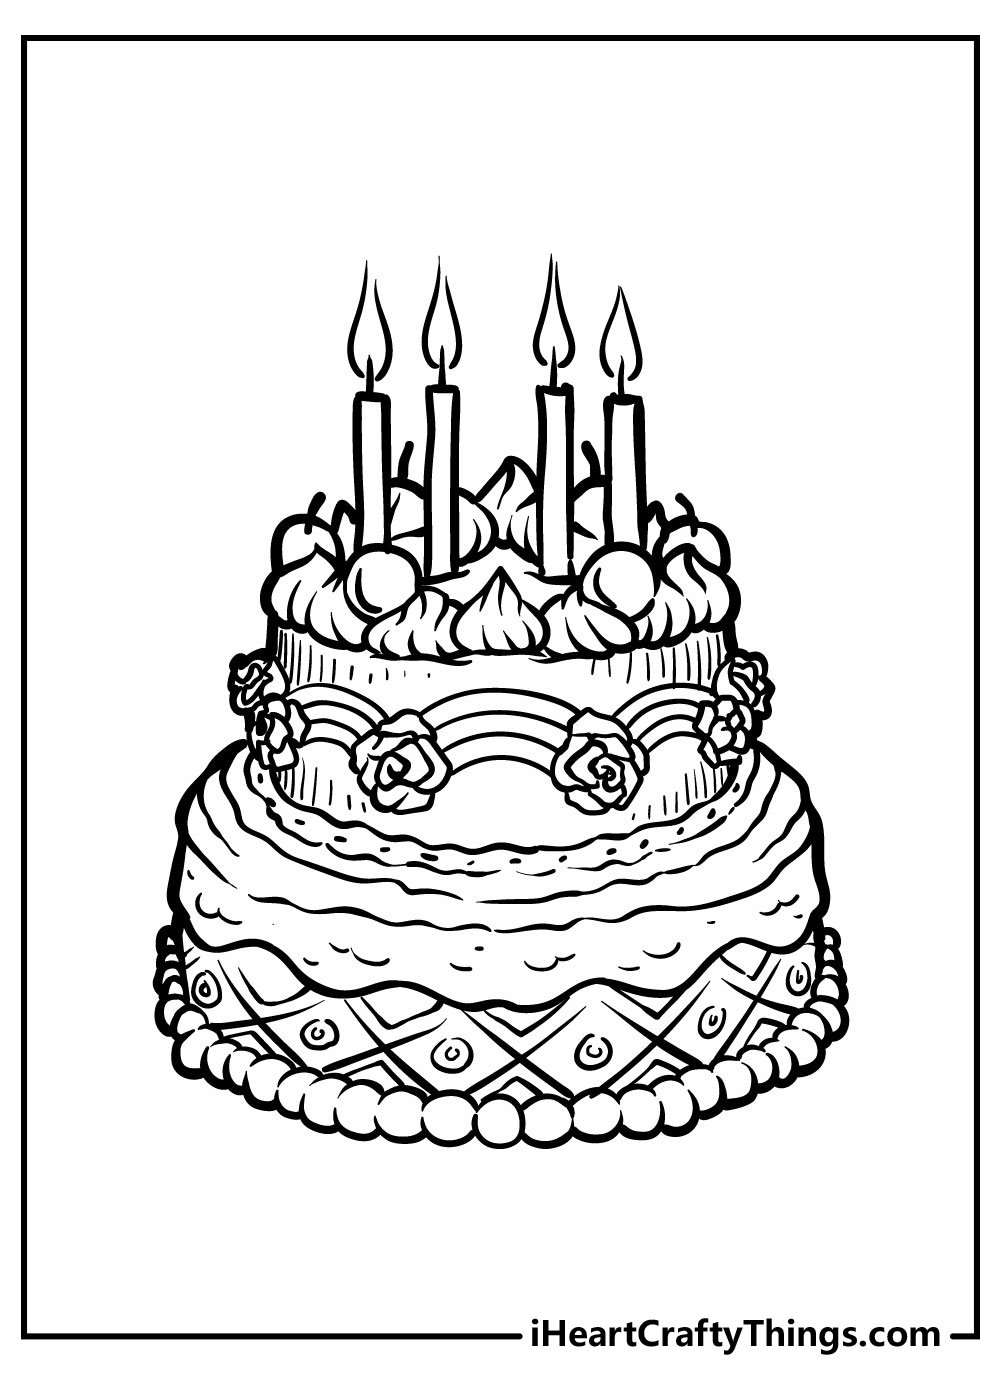 Cake coloring pages free printables